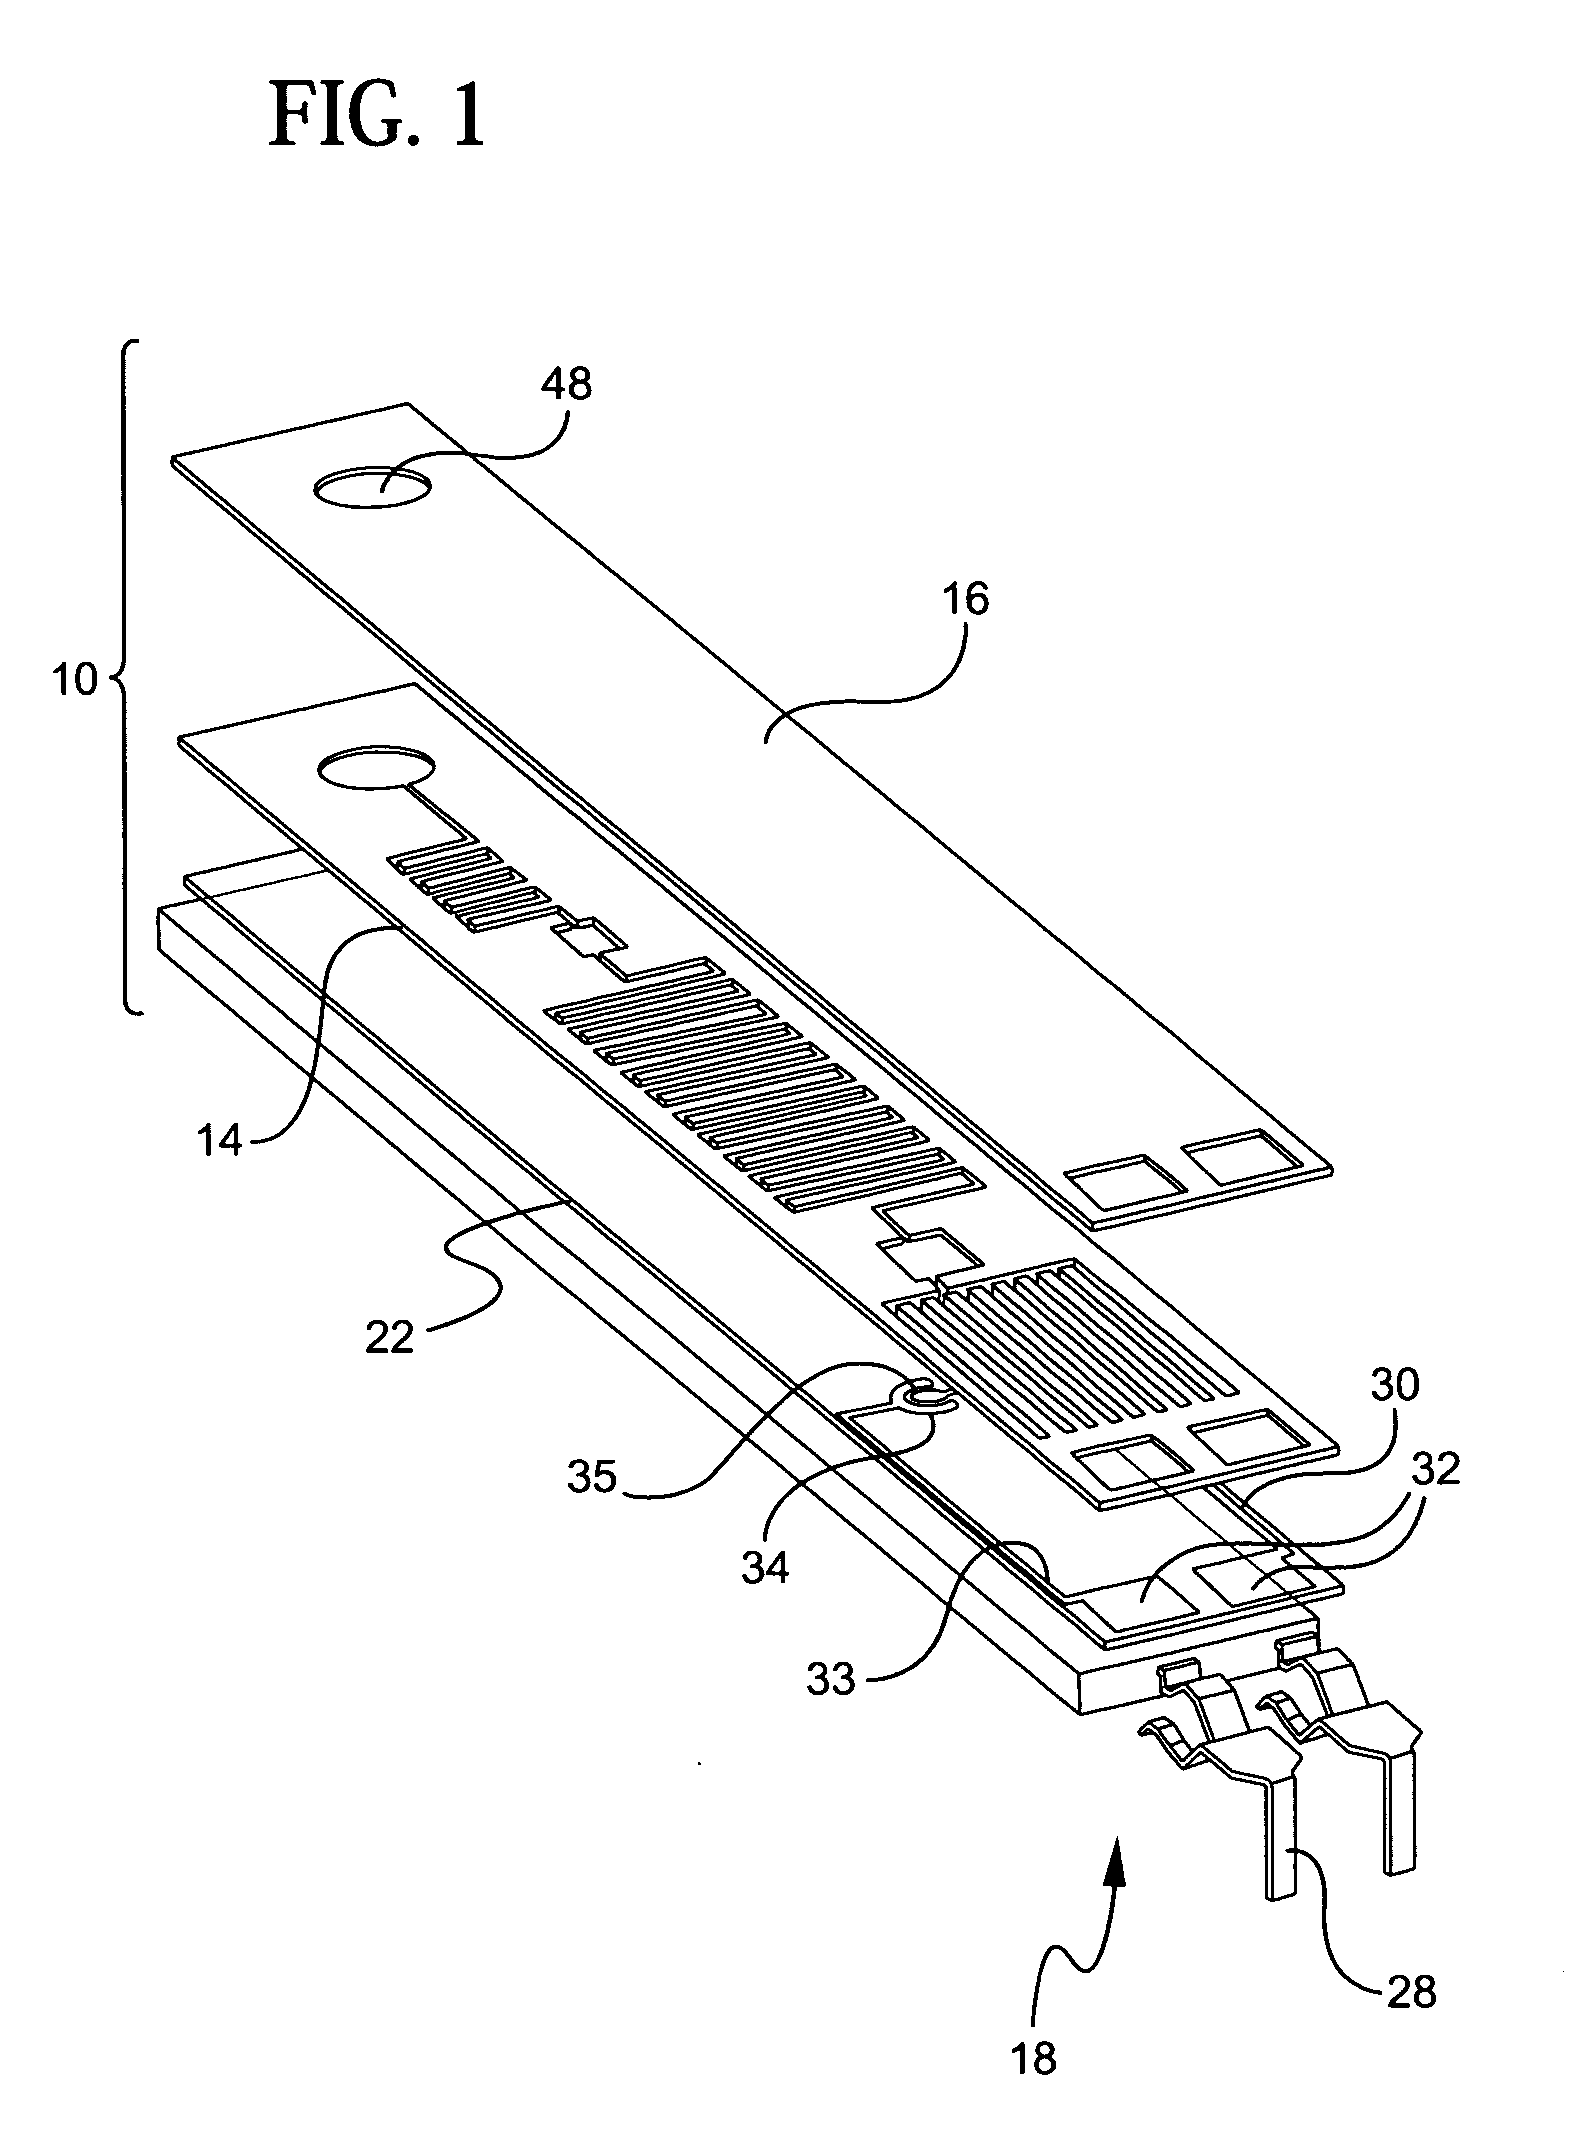 Microfluidic devices and methods of preparing and using the same